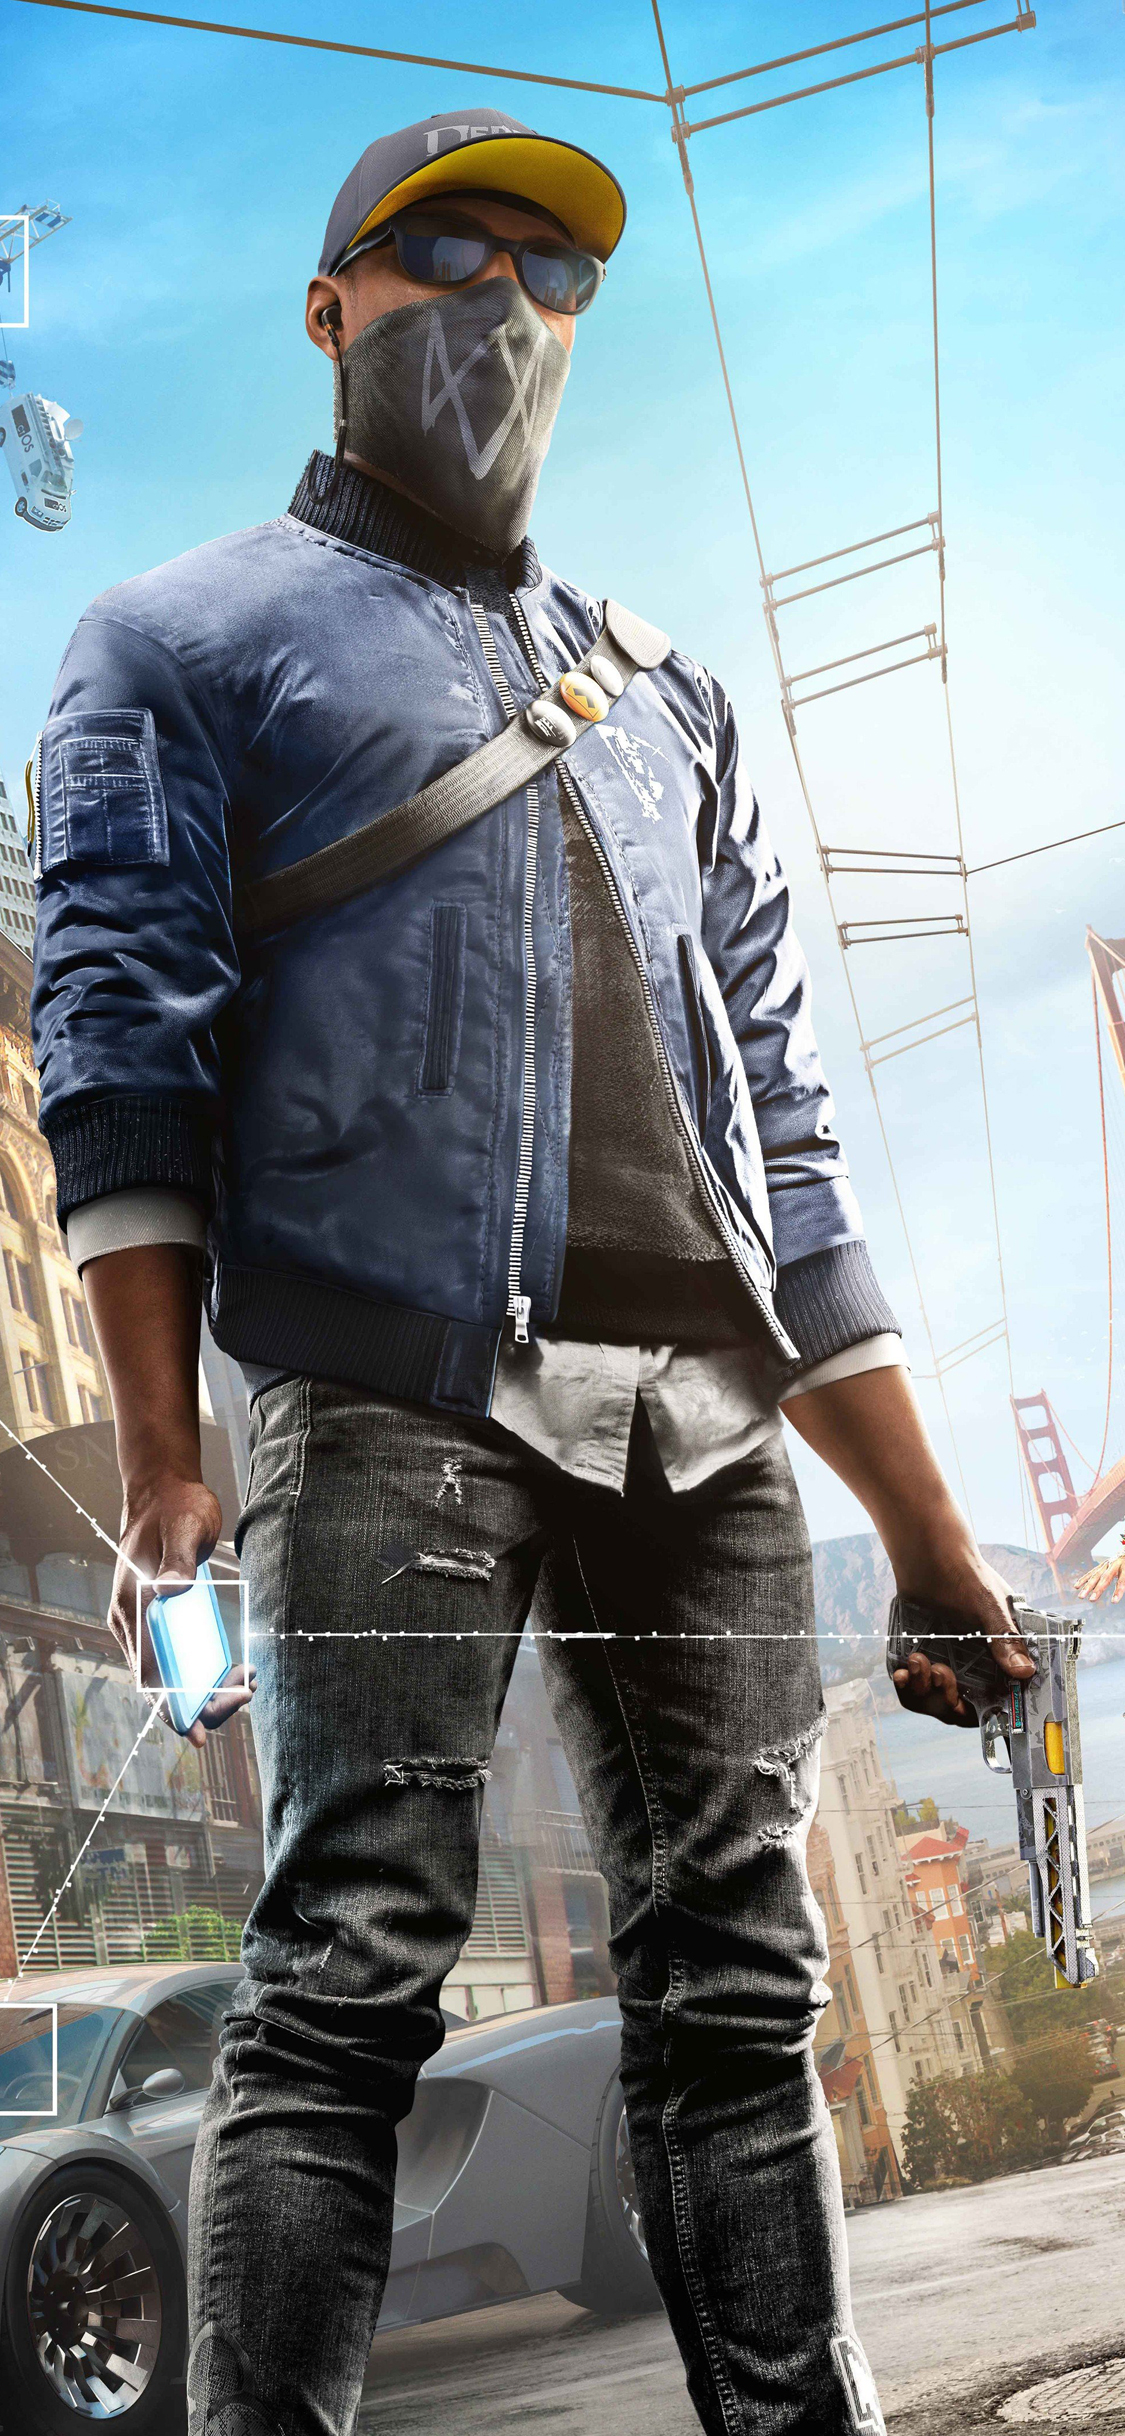 Iphone X Wallpaper 28 Hd High Resolution 1125 X 2436 - Watch Dogs 2 Wallpaper 4k For Android - HD Wallpaper 